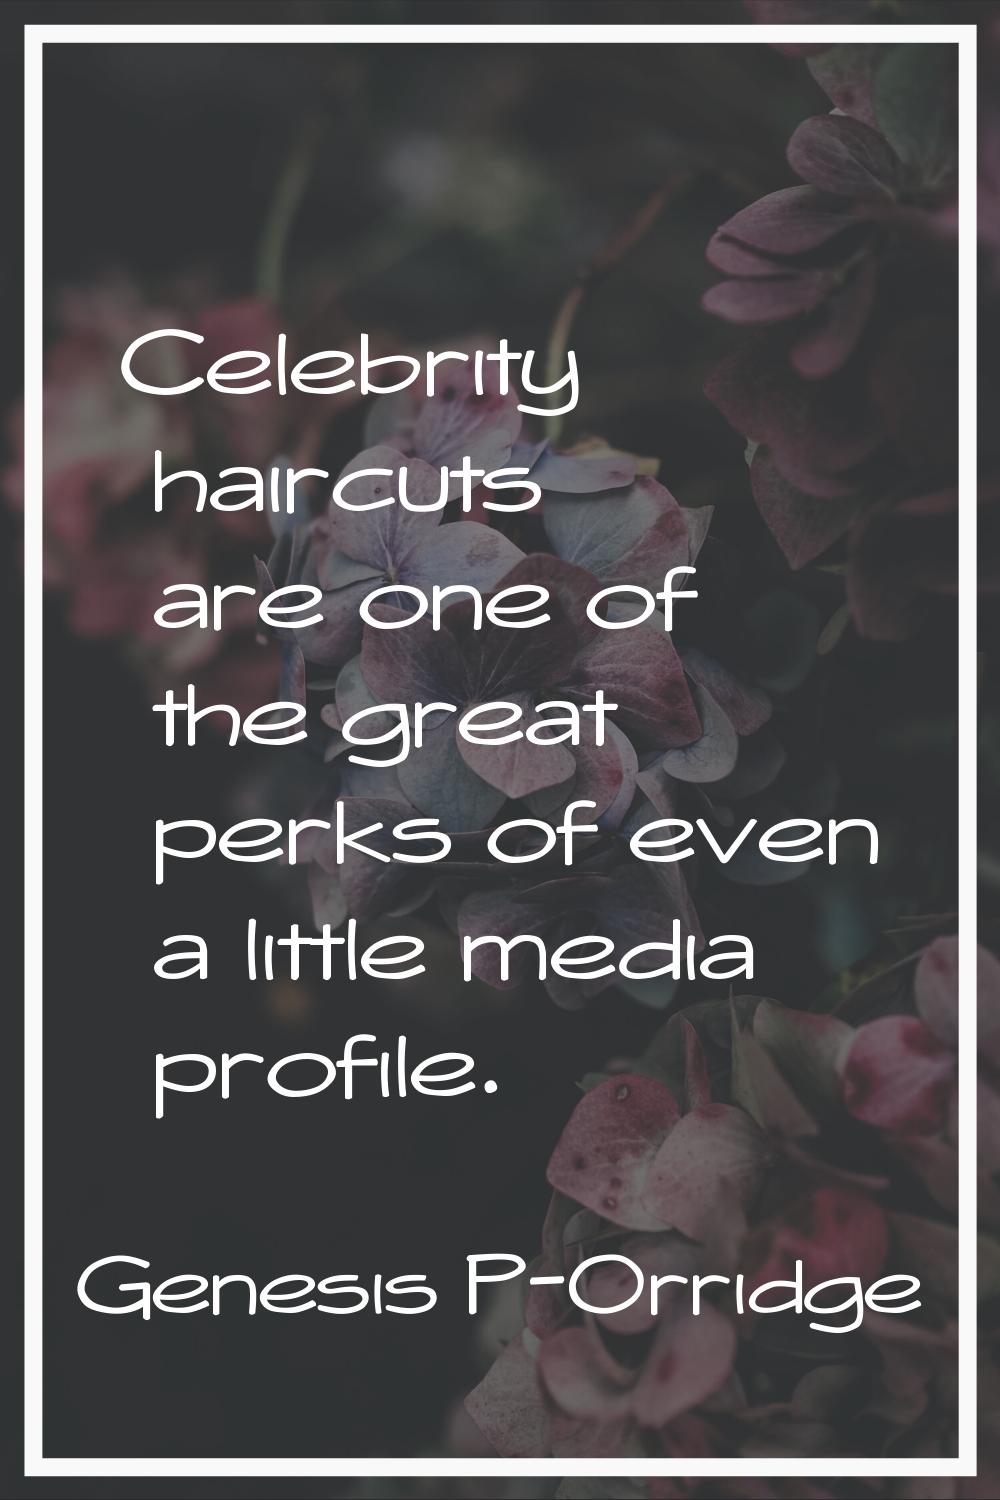 Celebrity haircuts are one of the great perks of even a little media profile.